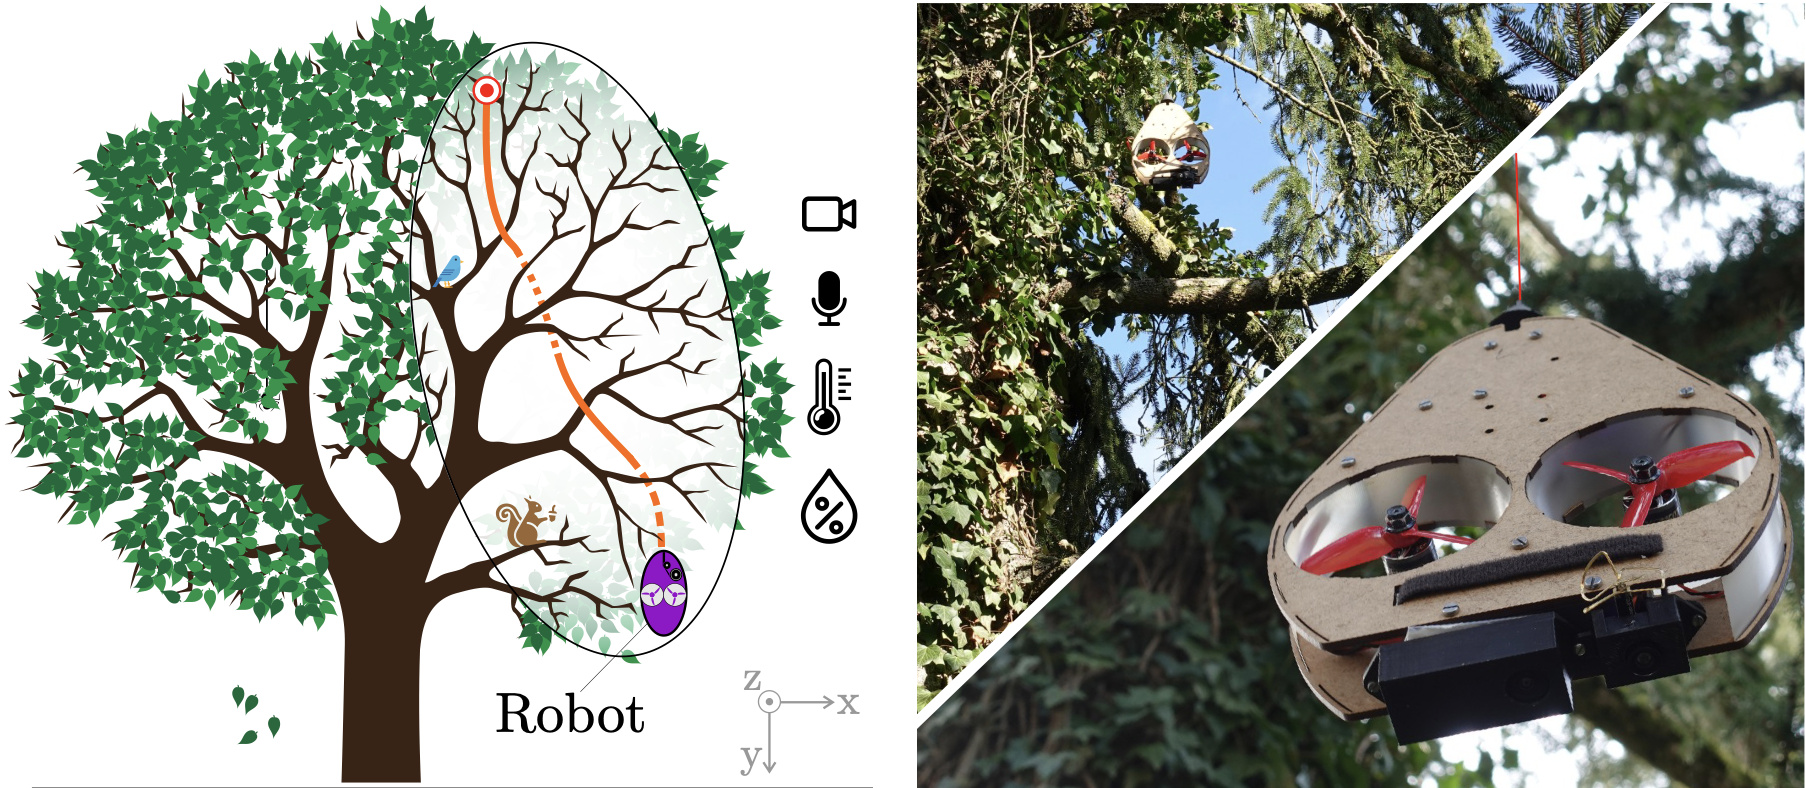 aerial tethered robot exploring tree canopies